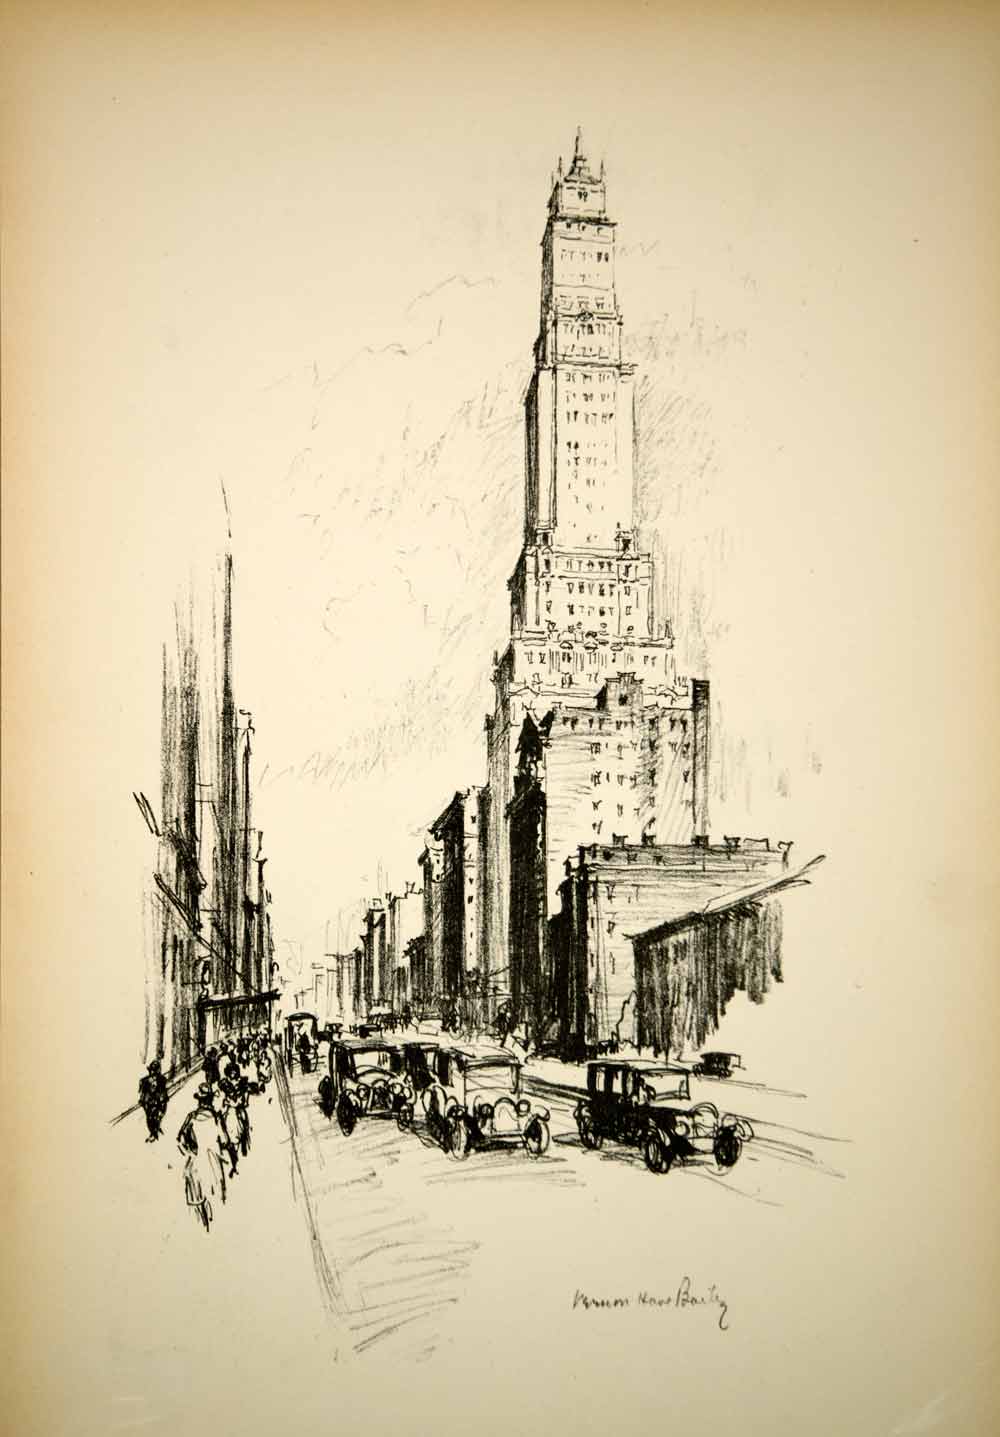 1928 Photolithograph Ritz Tower 465 Park Avenue NYC Vernon Howe Bailey NYS1